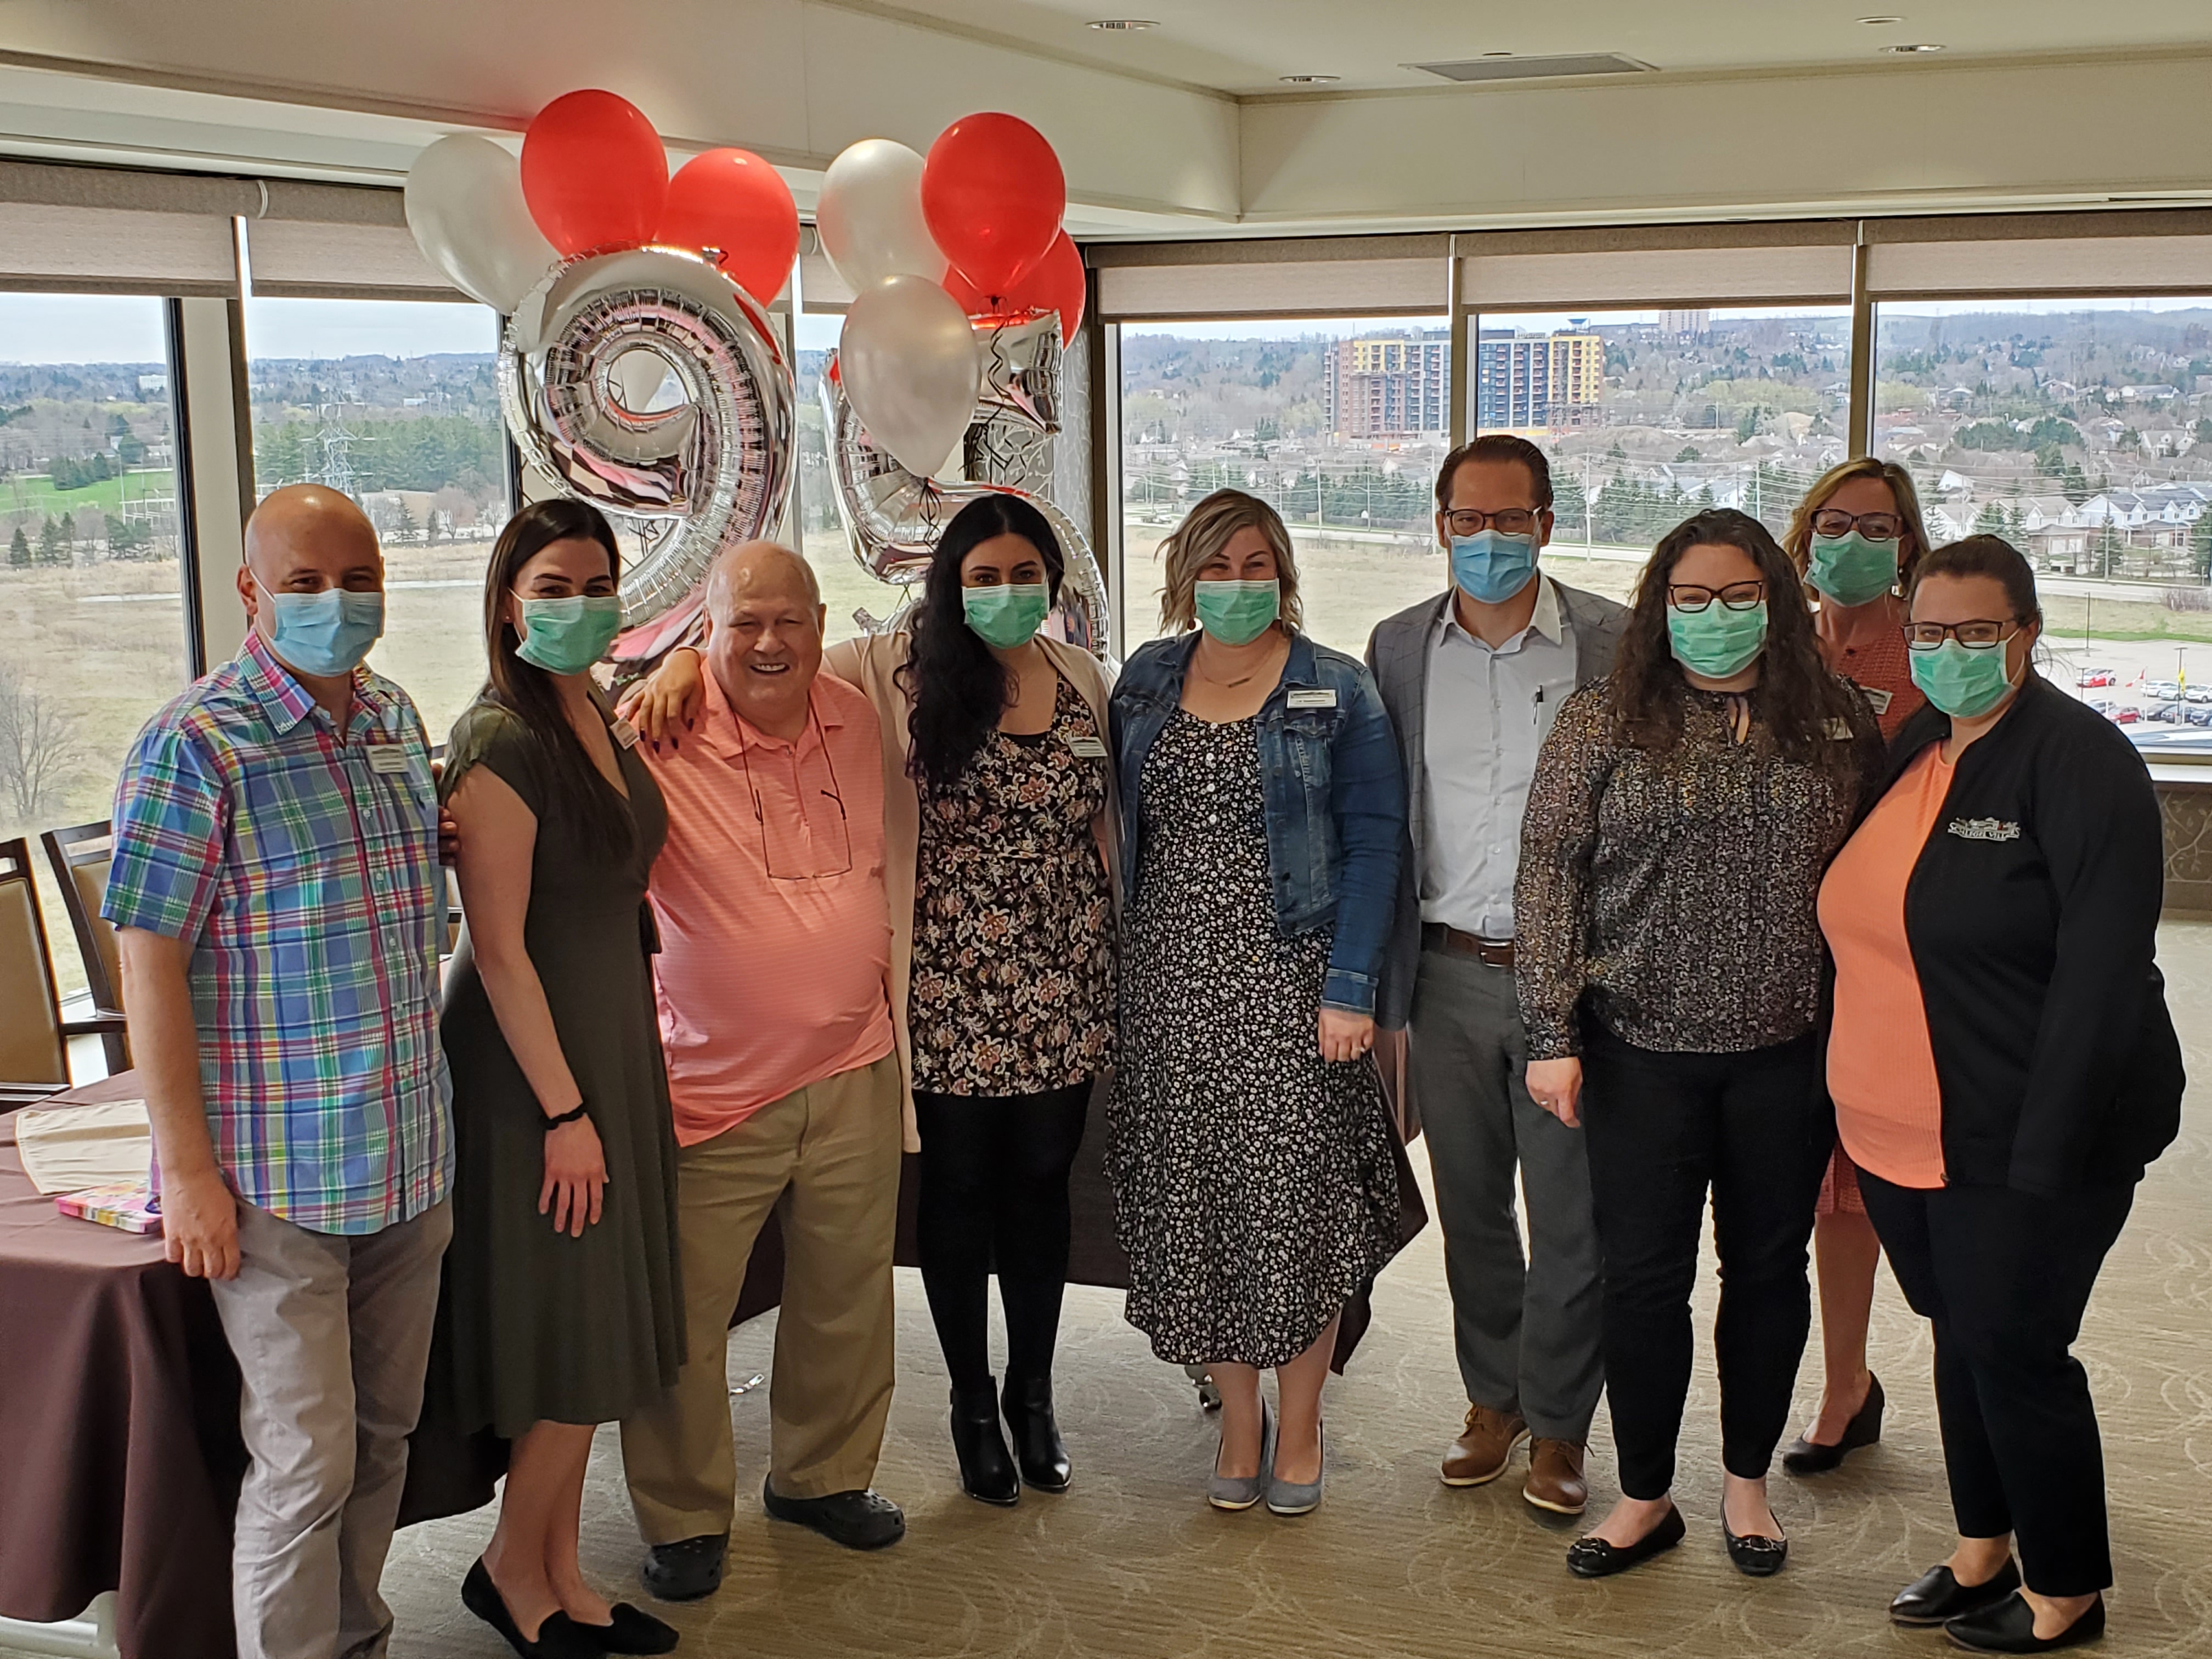 Ron and Jamie Schlegel were with the team from The  Village at University Gates to mark an amazing milestone as the Village is at near full capacity, filling up with new  residents, despite the challenges of the COVID-19 pandemic. 